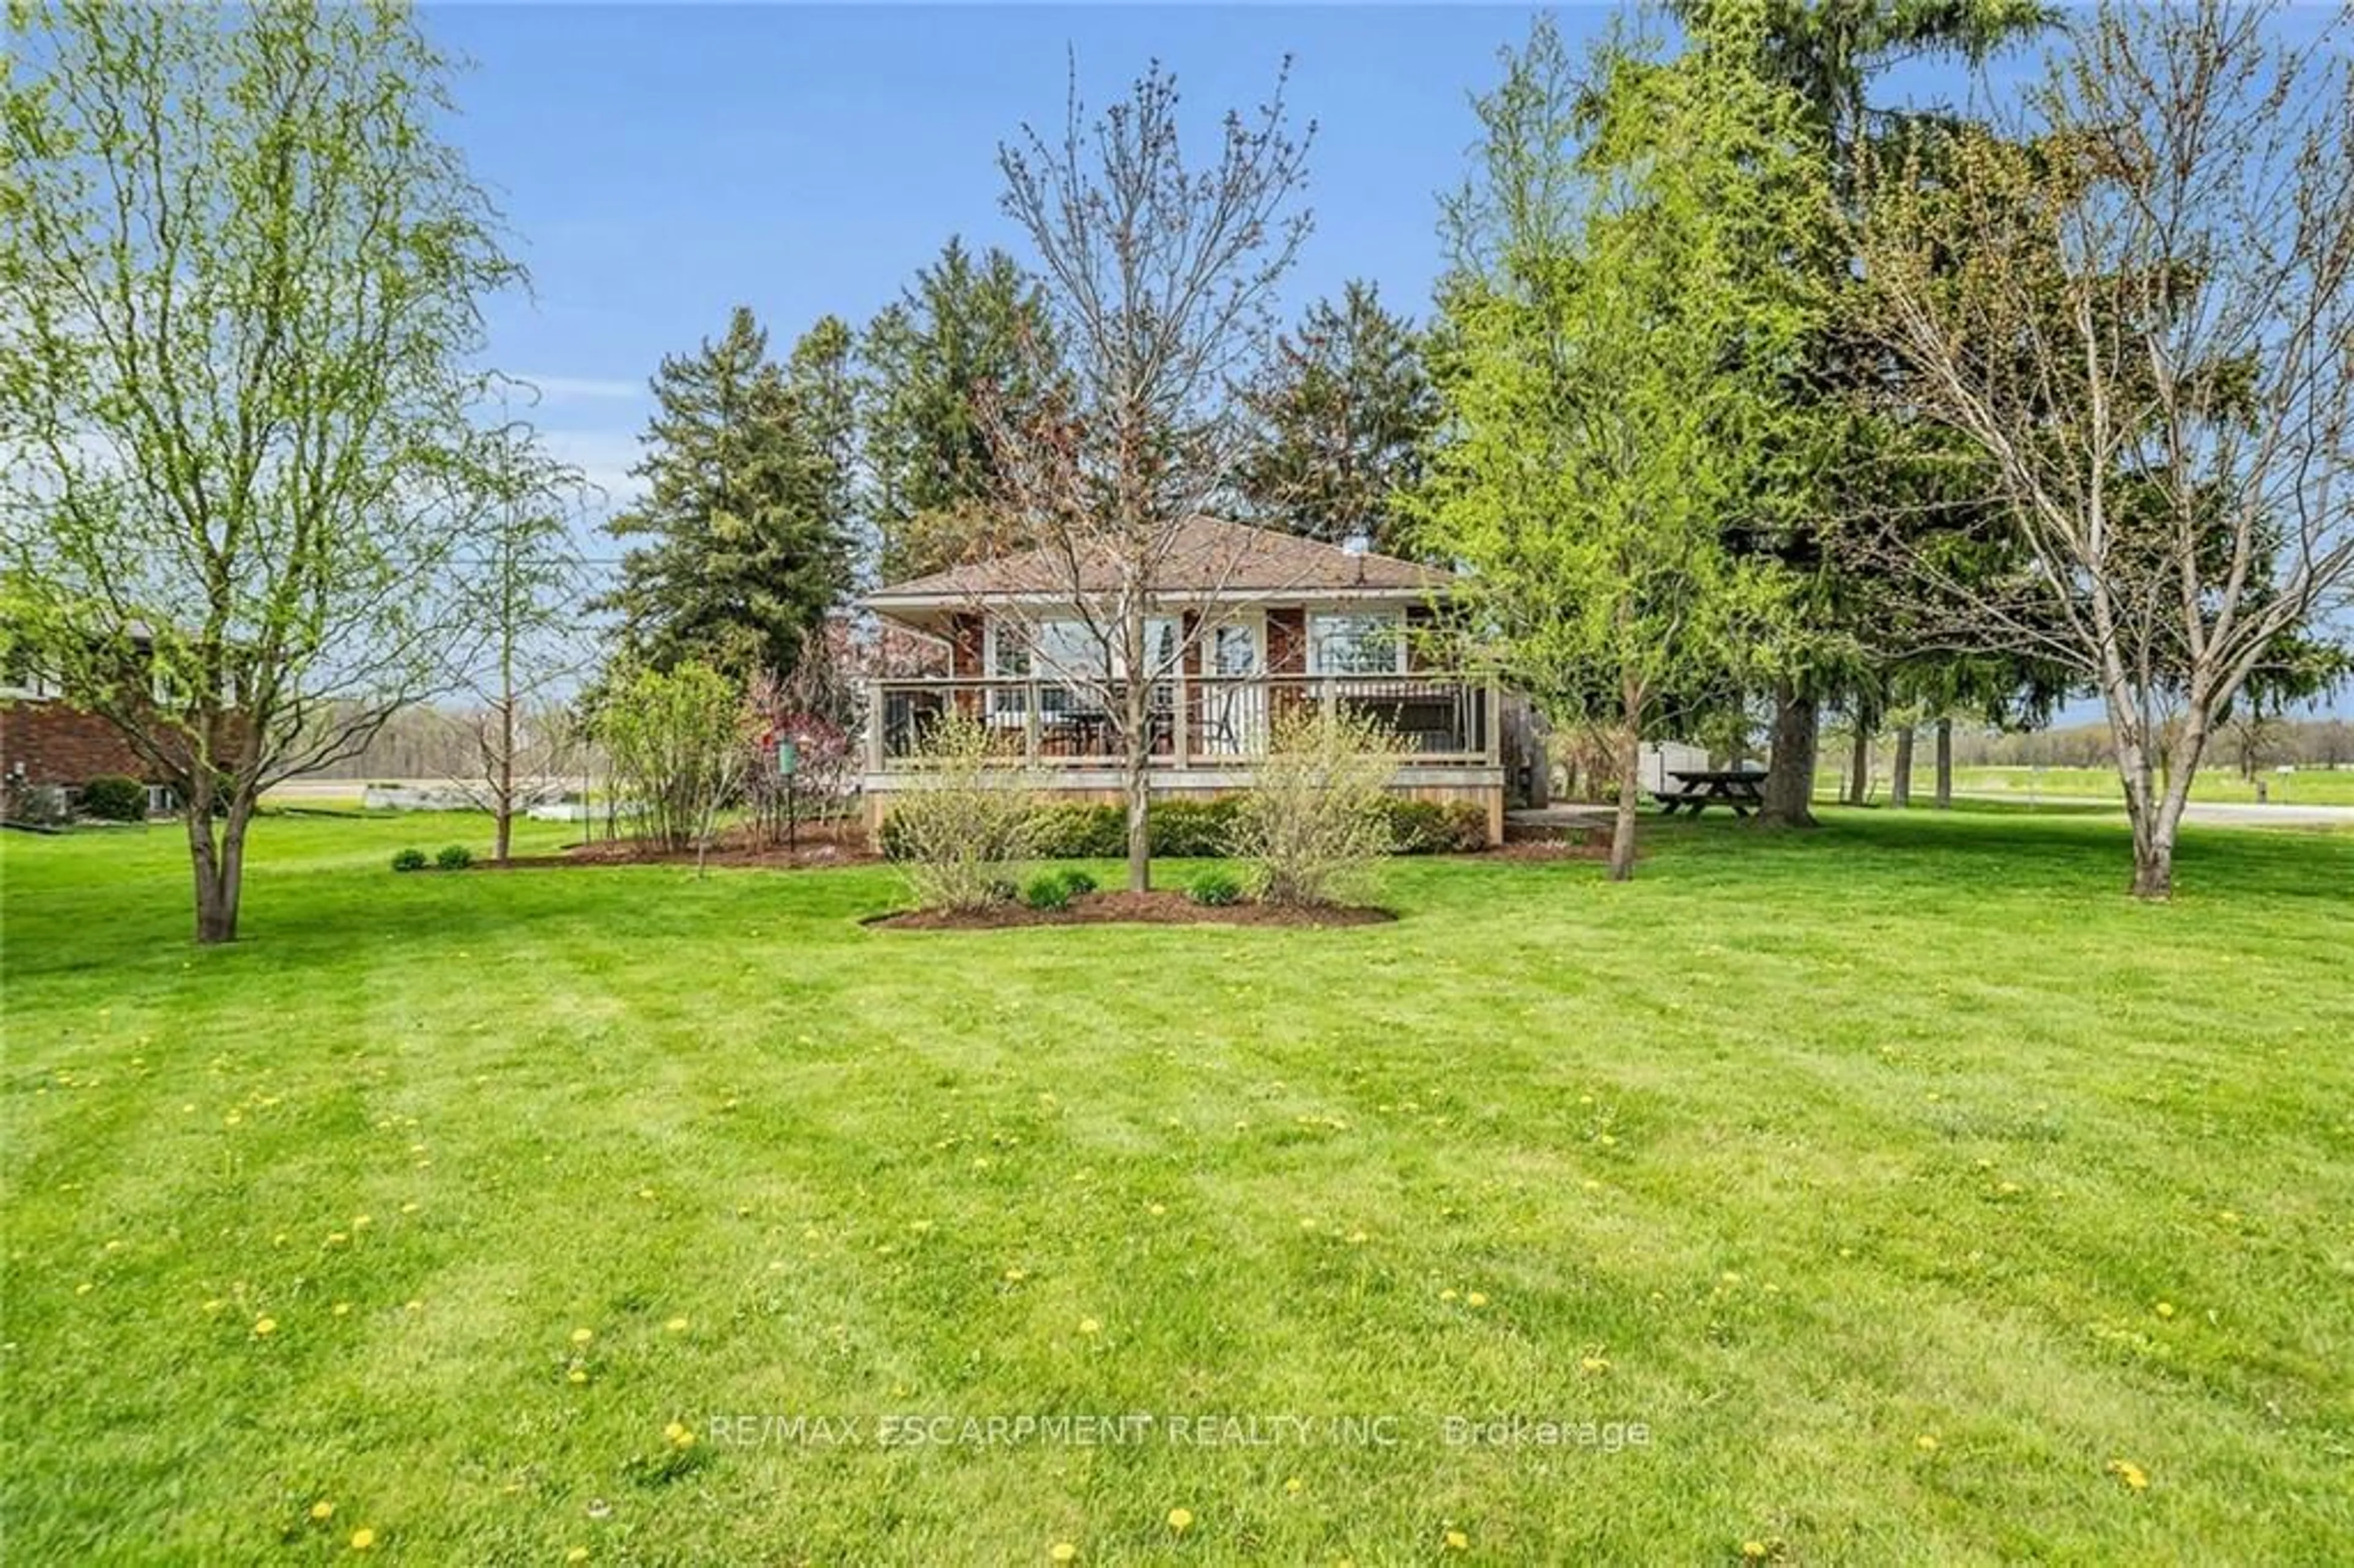 Fenced yard for 53408 Marr Rd, Wainfleet Ontario L0S 1V0